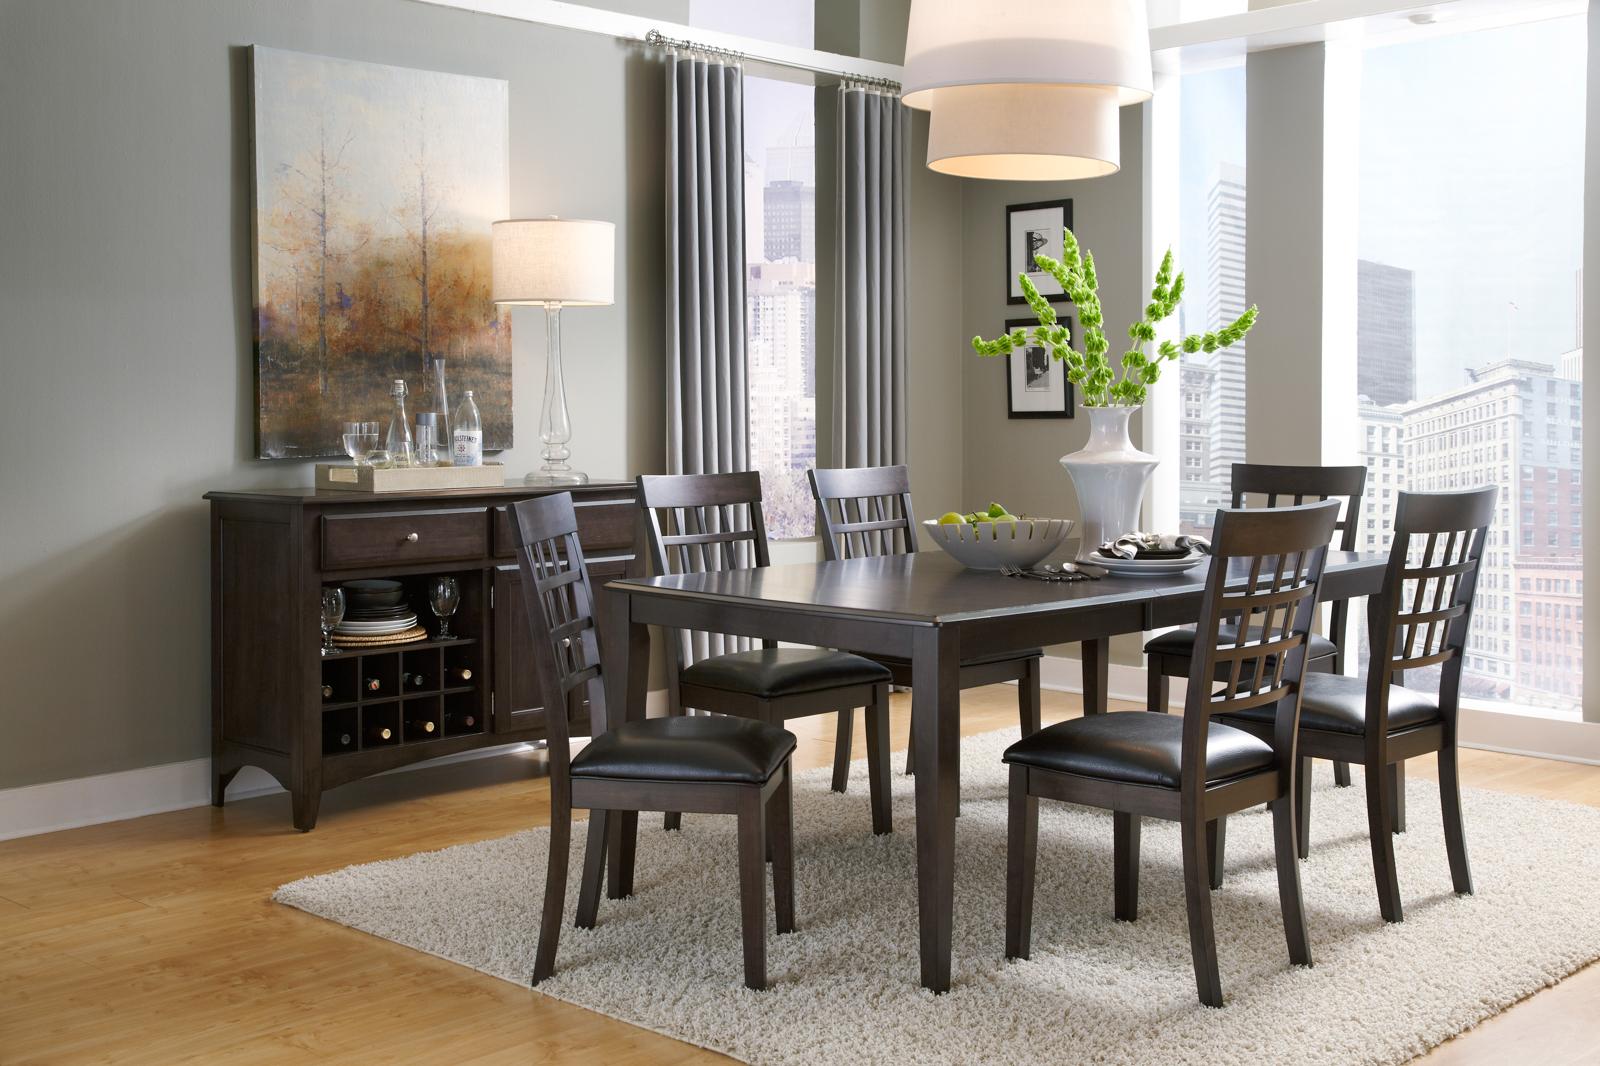 A America Bristol Point WG Dining Table